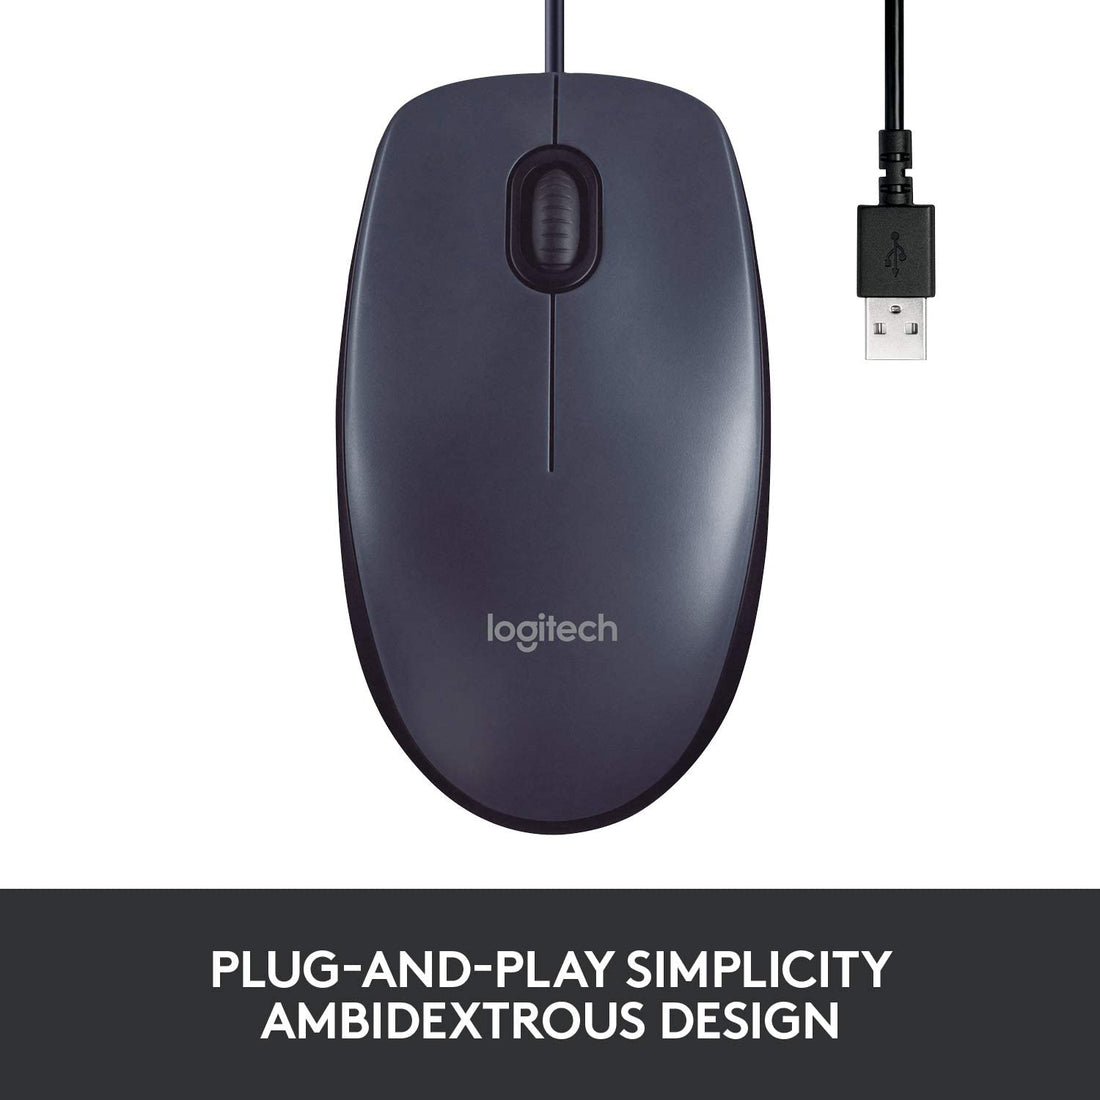 Logitech B100 Wired USB Mouse, 3-Buttons, Black